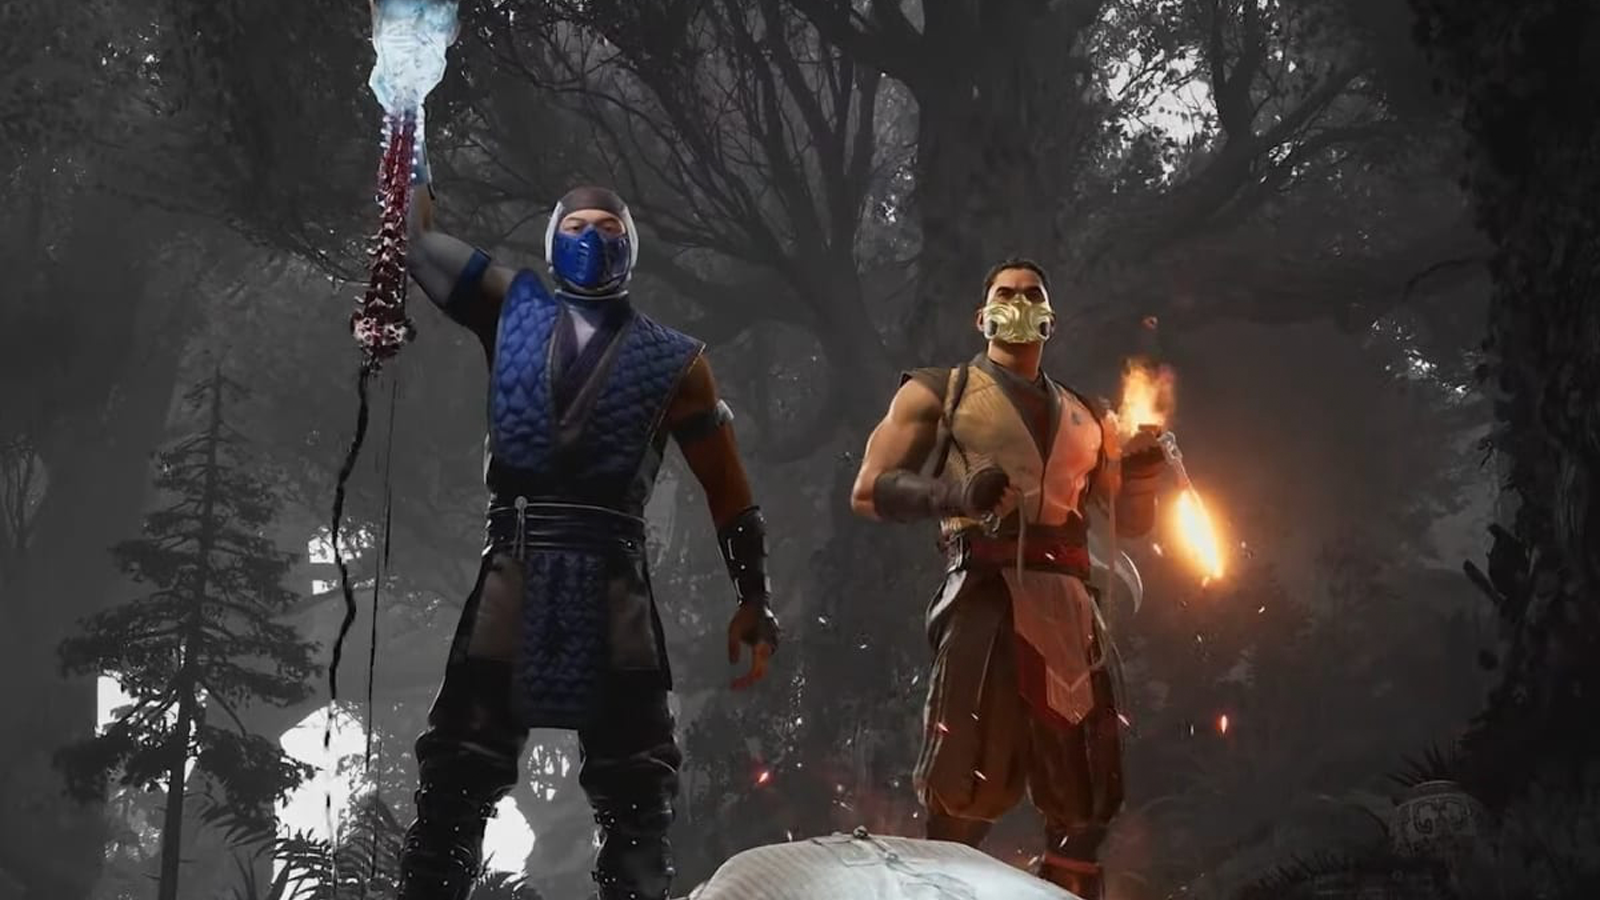 How many chapters are there in Mortal Kombat 1 story mode?